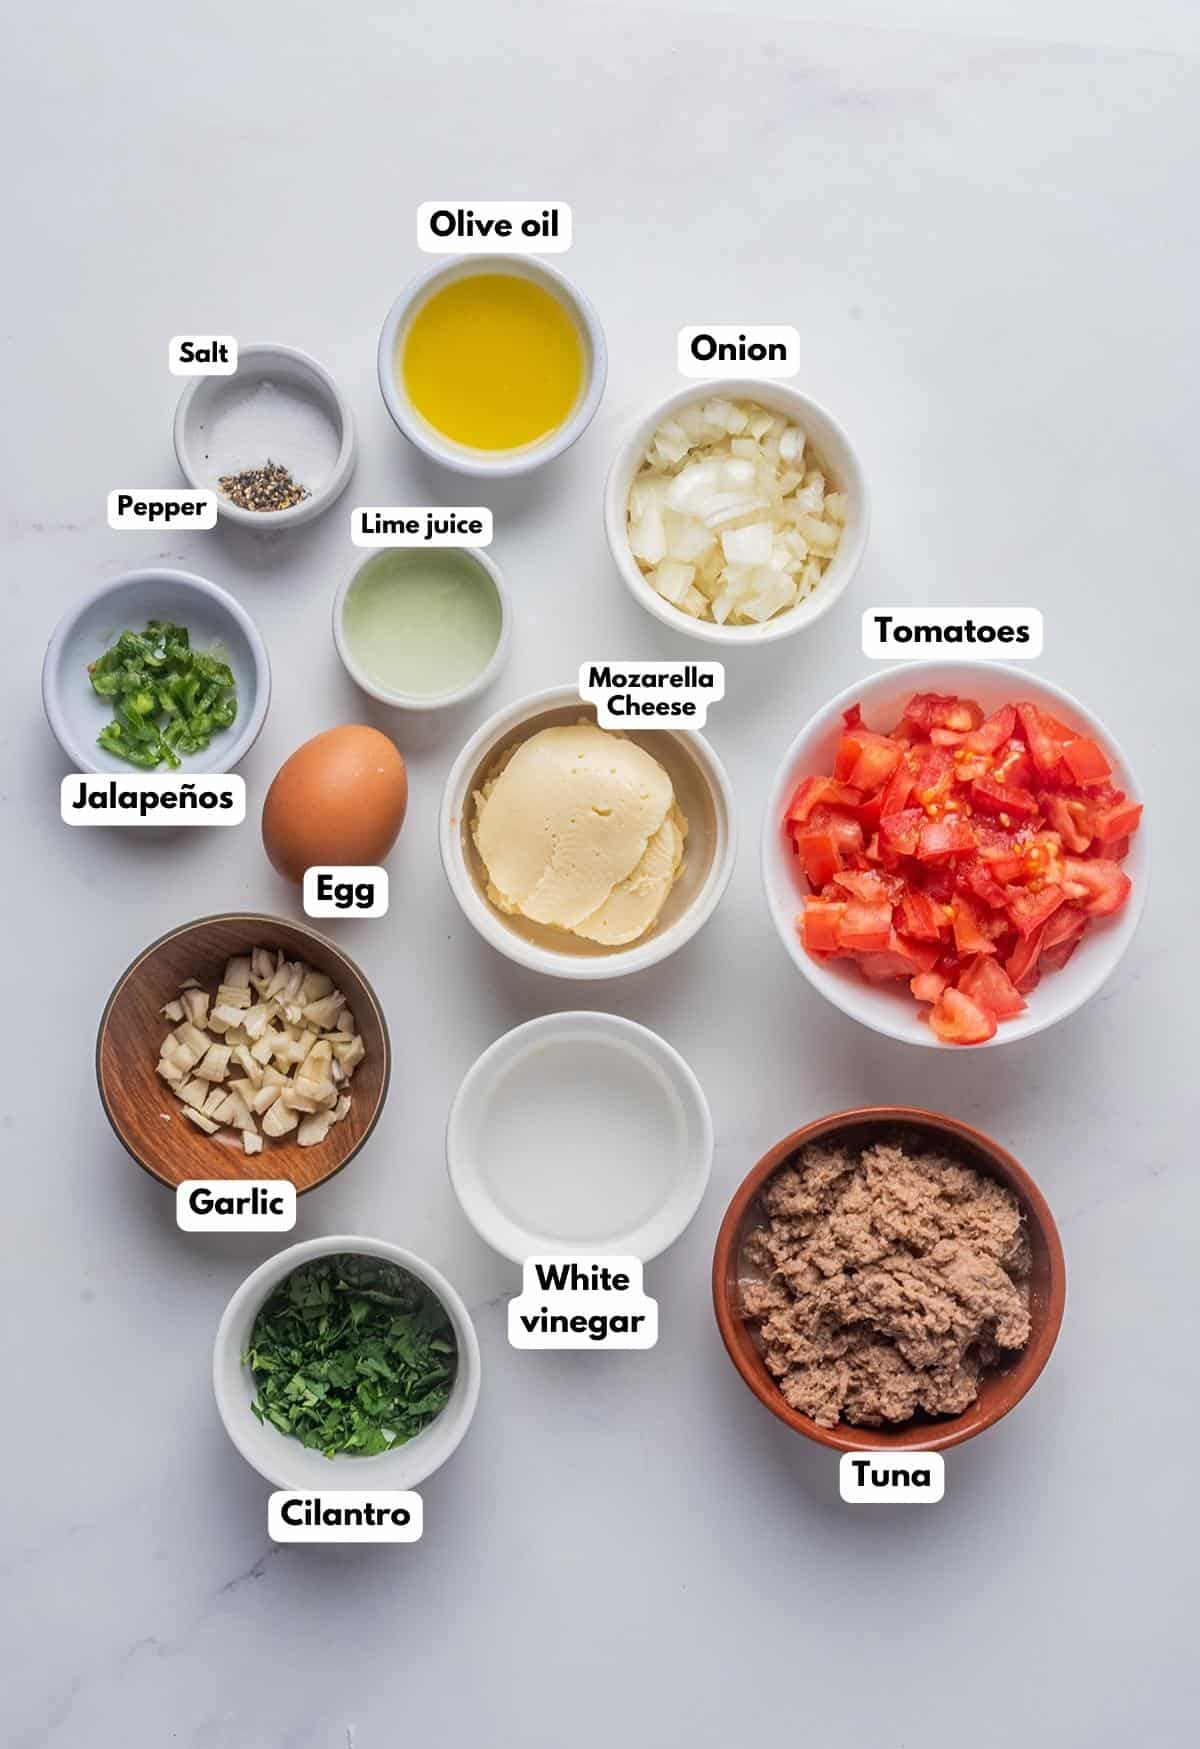 The ingredients needed to make the filling.